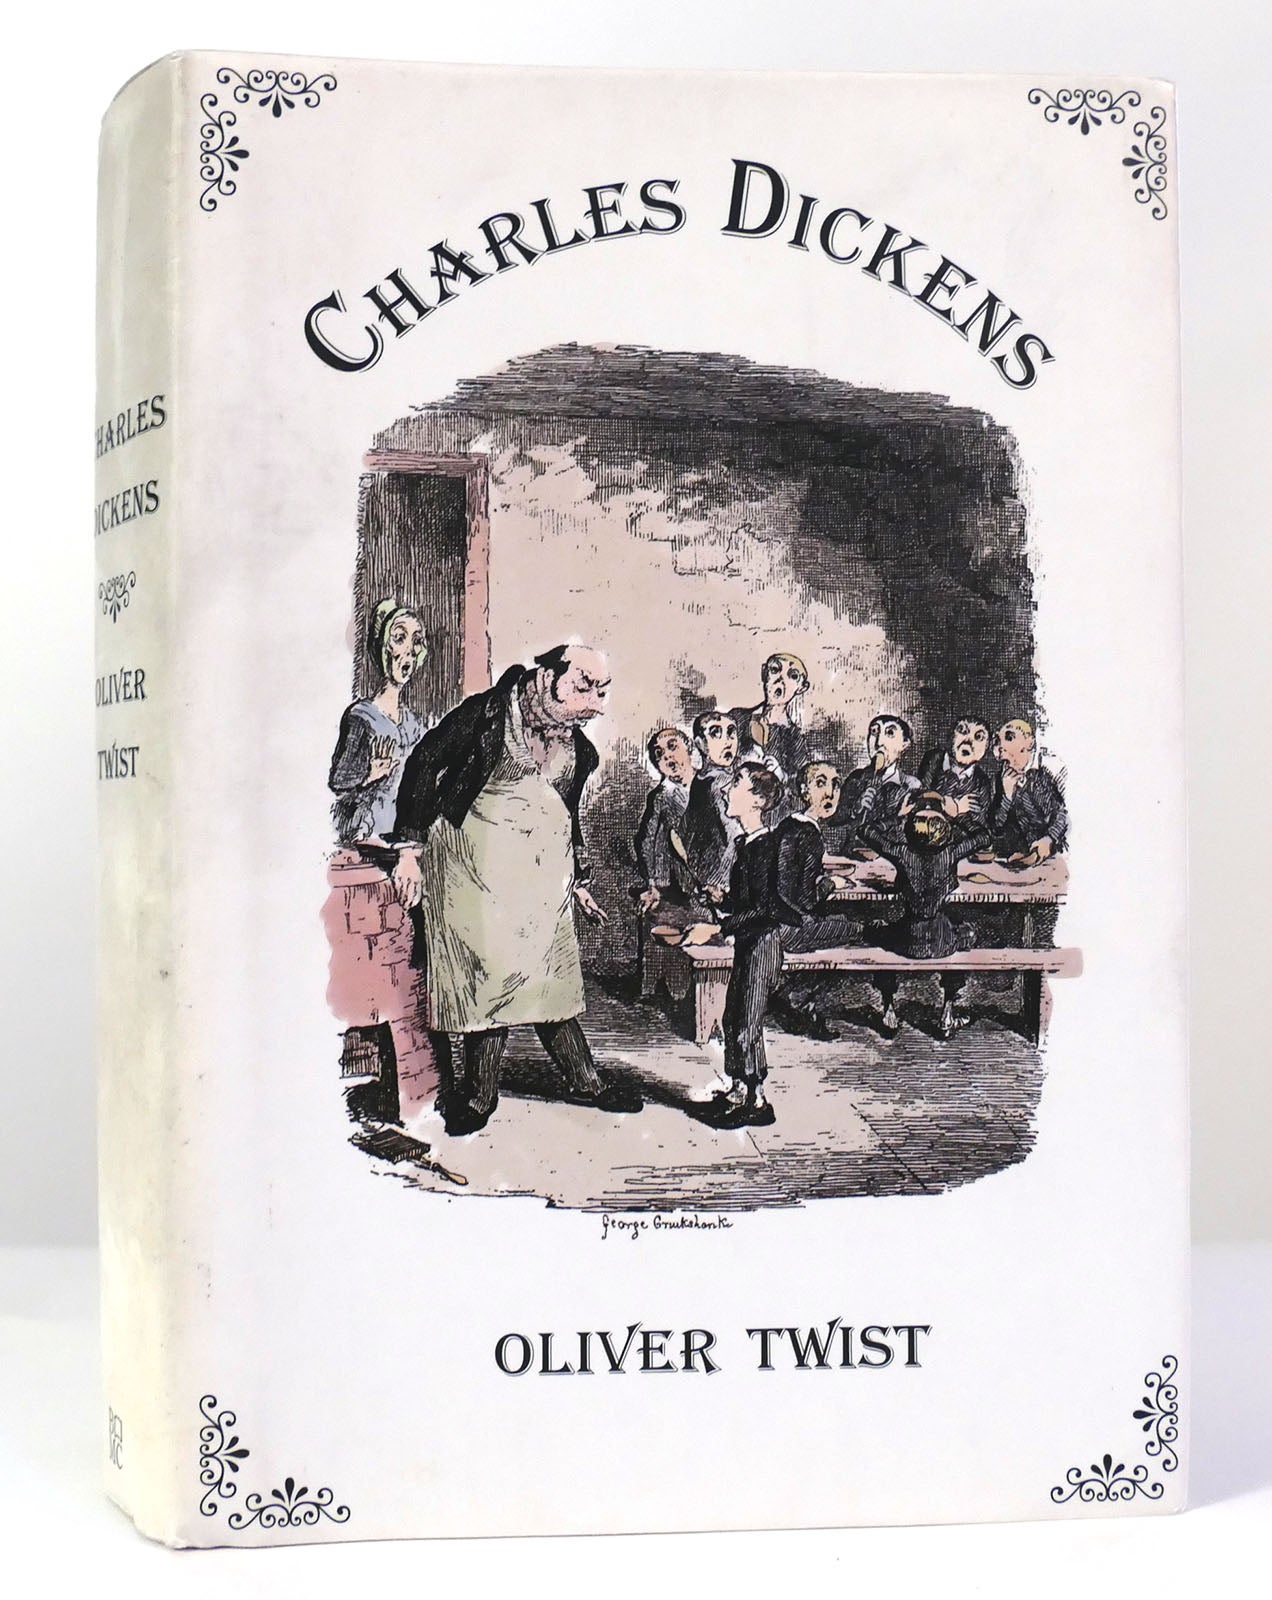 THE ADVENTURES OF OLIVER TWIST, Charles Dickens